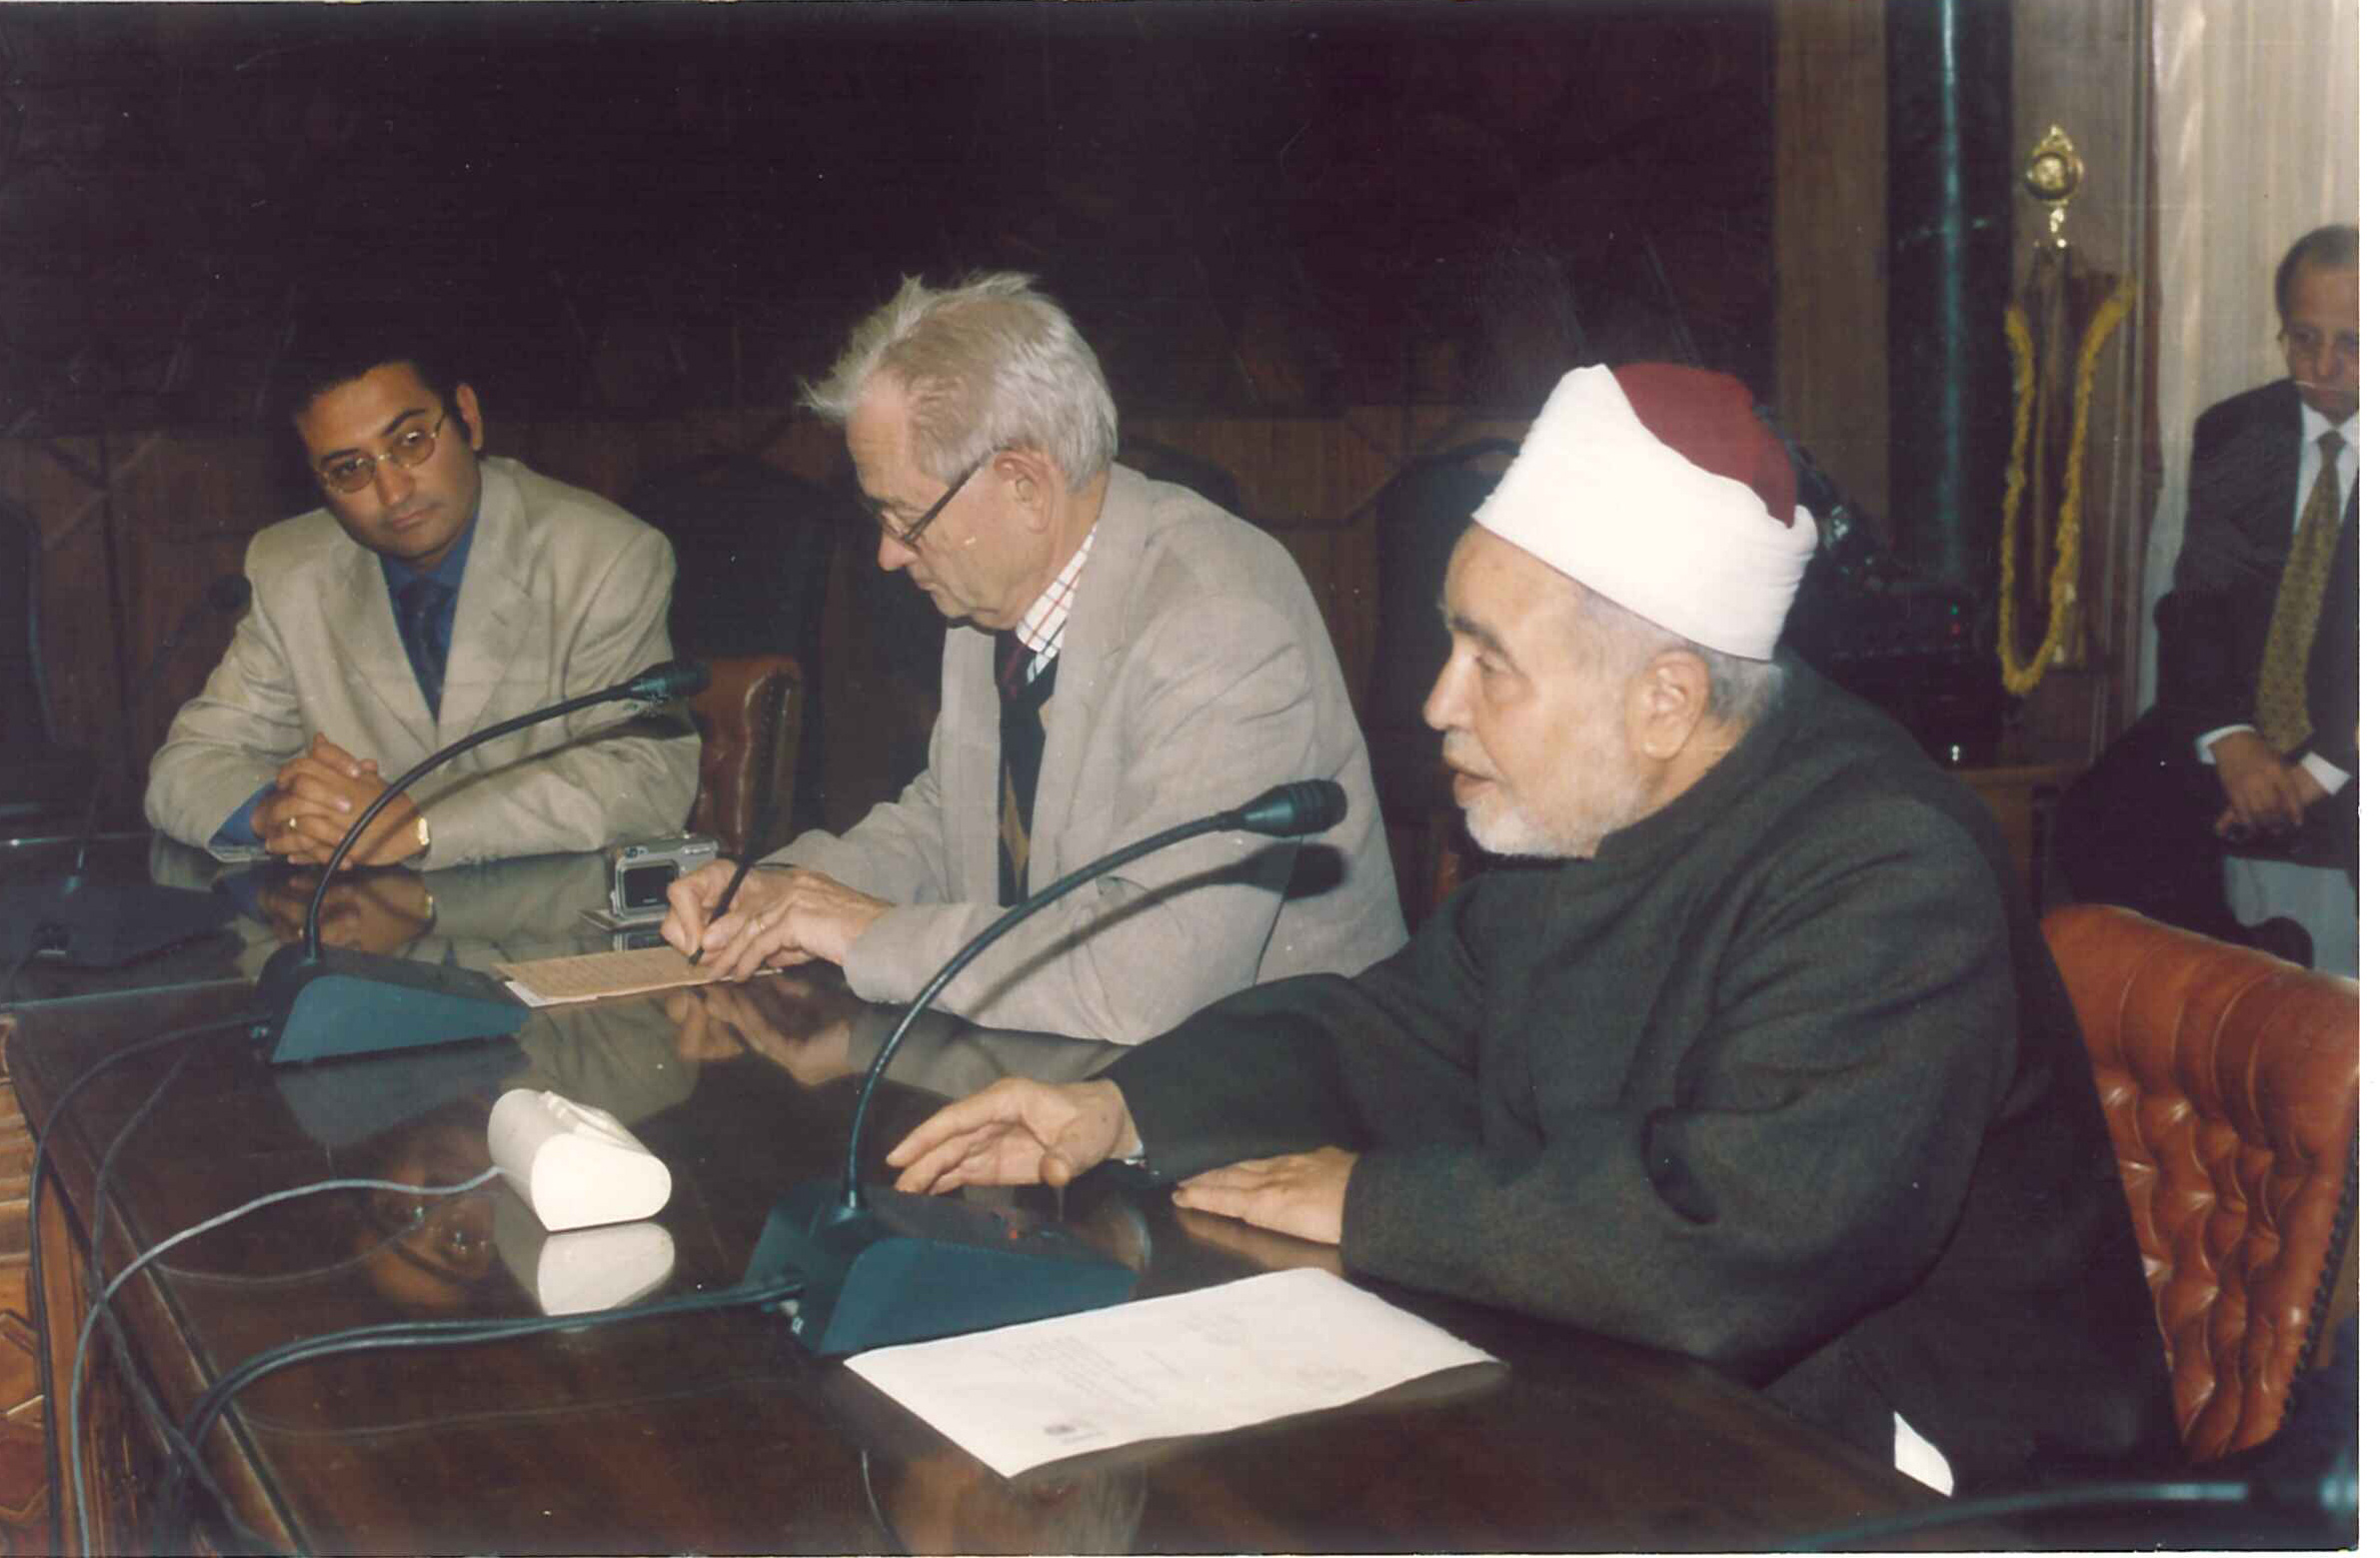 Sameh Egyptson in dialouge with The great imam of al-Azhar Tantawy